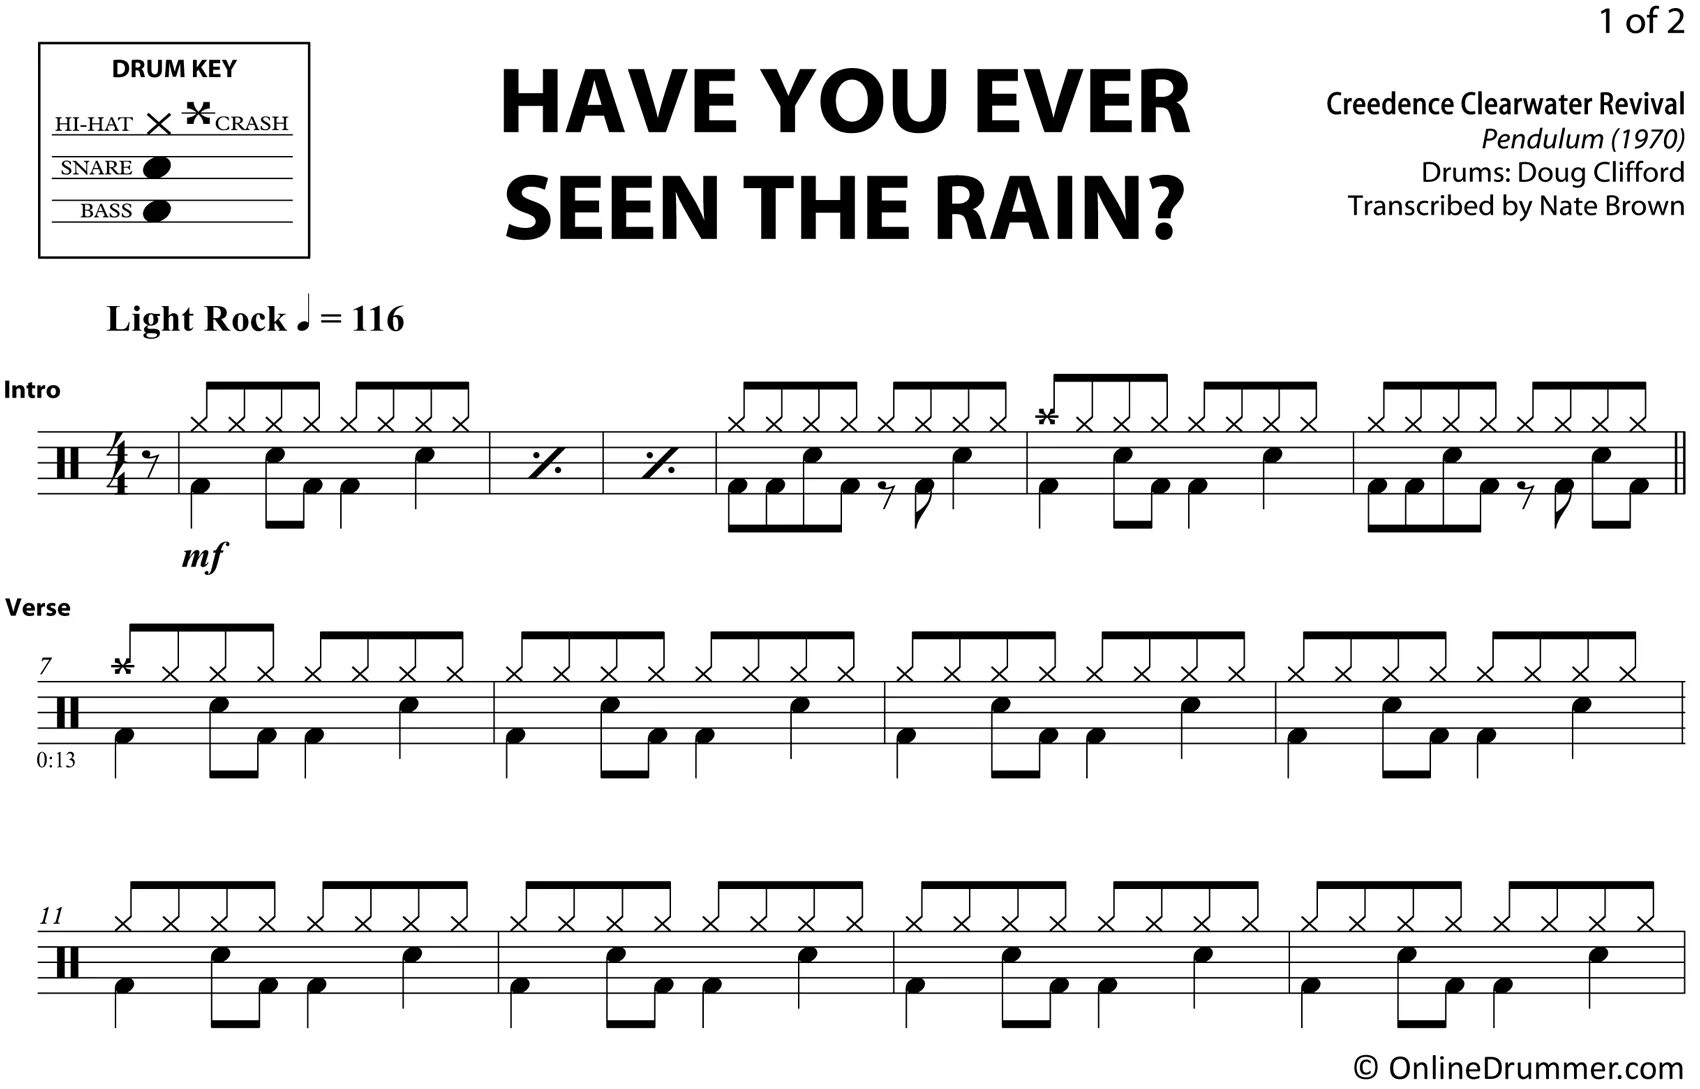 Have you ever seen the Rain? От Creedence Clearwater Revival. Creedence Clearwater Revival - have you ever seen the Rain (1970). Have you ever seen the Rain Криденс. Have you ever seen the Rain Ноты. Creedence clearwater rain